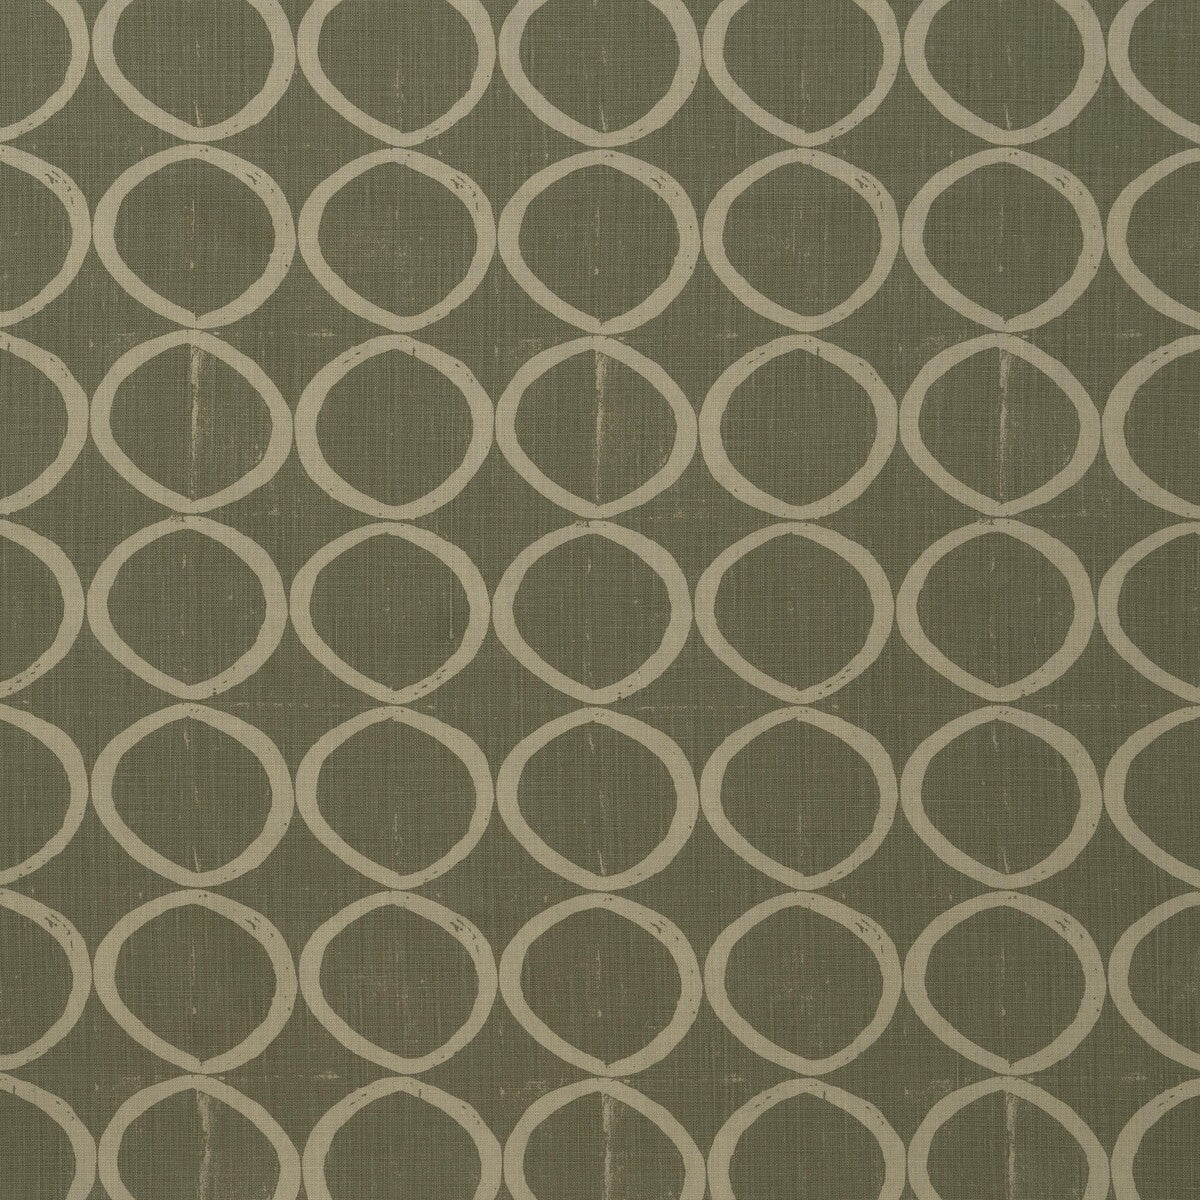 Circles fabric in dove color - pattern BFC-3665.113.0 - by Lee Jofa in the Blithfield collection